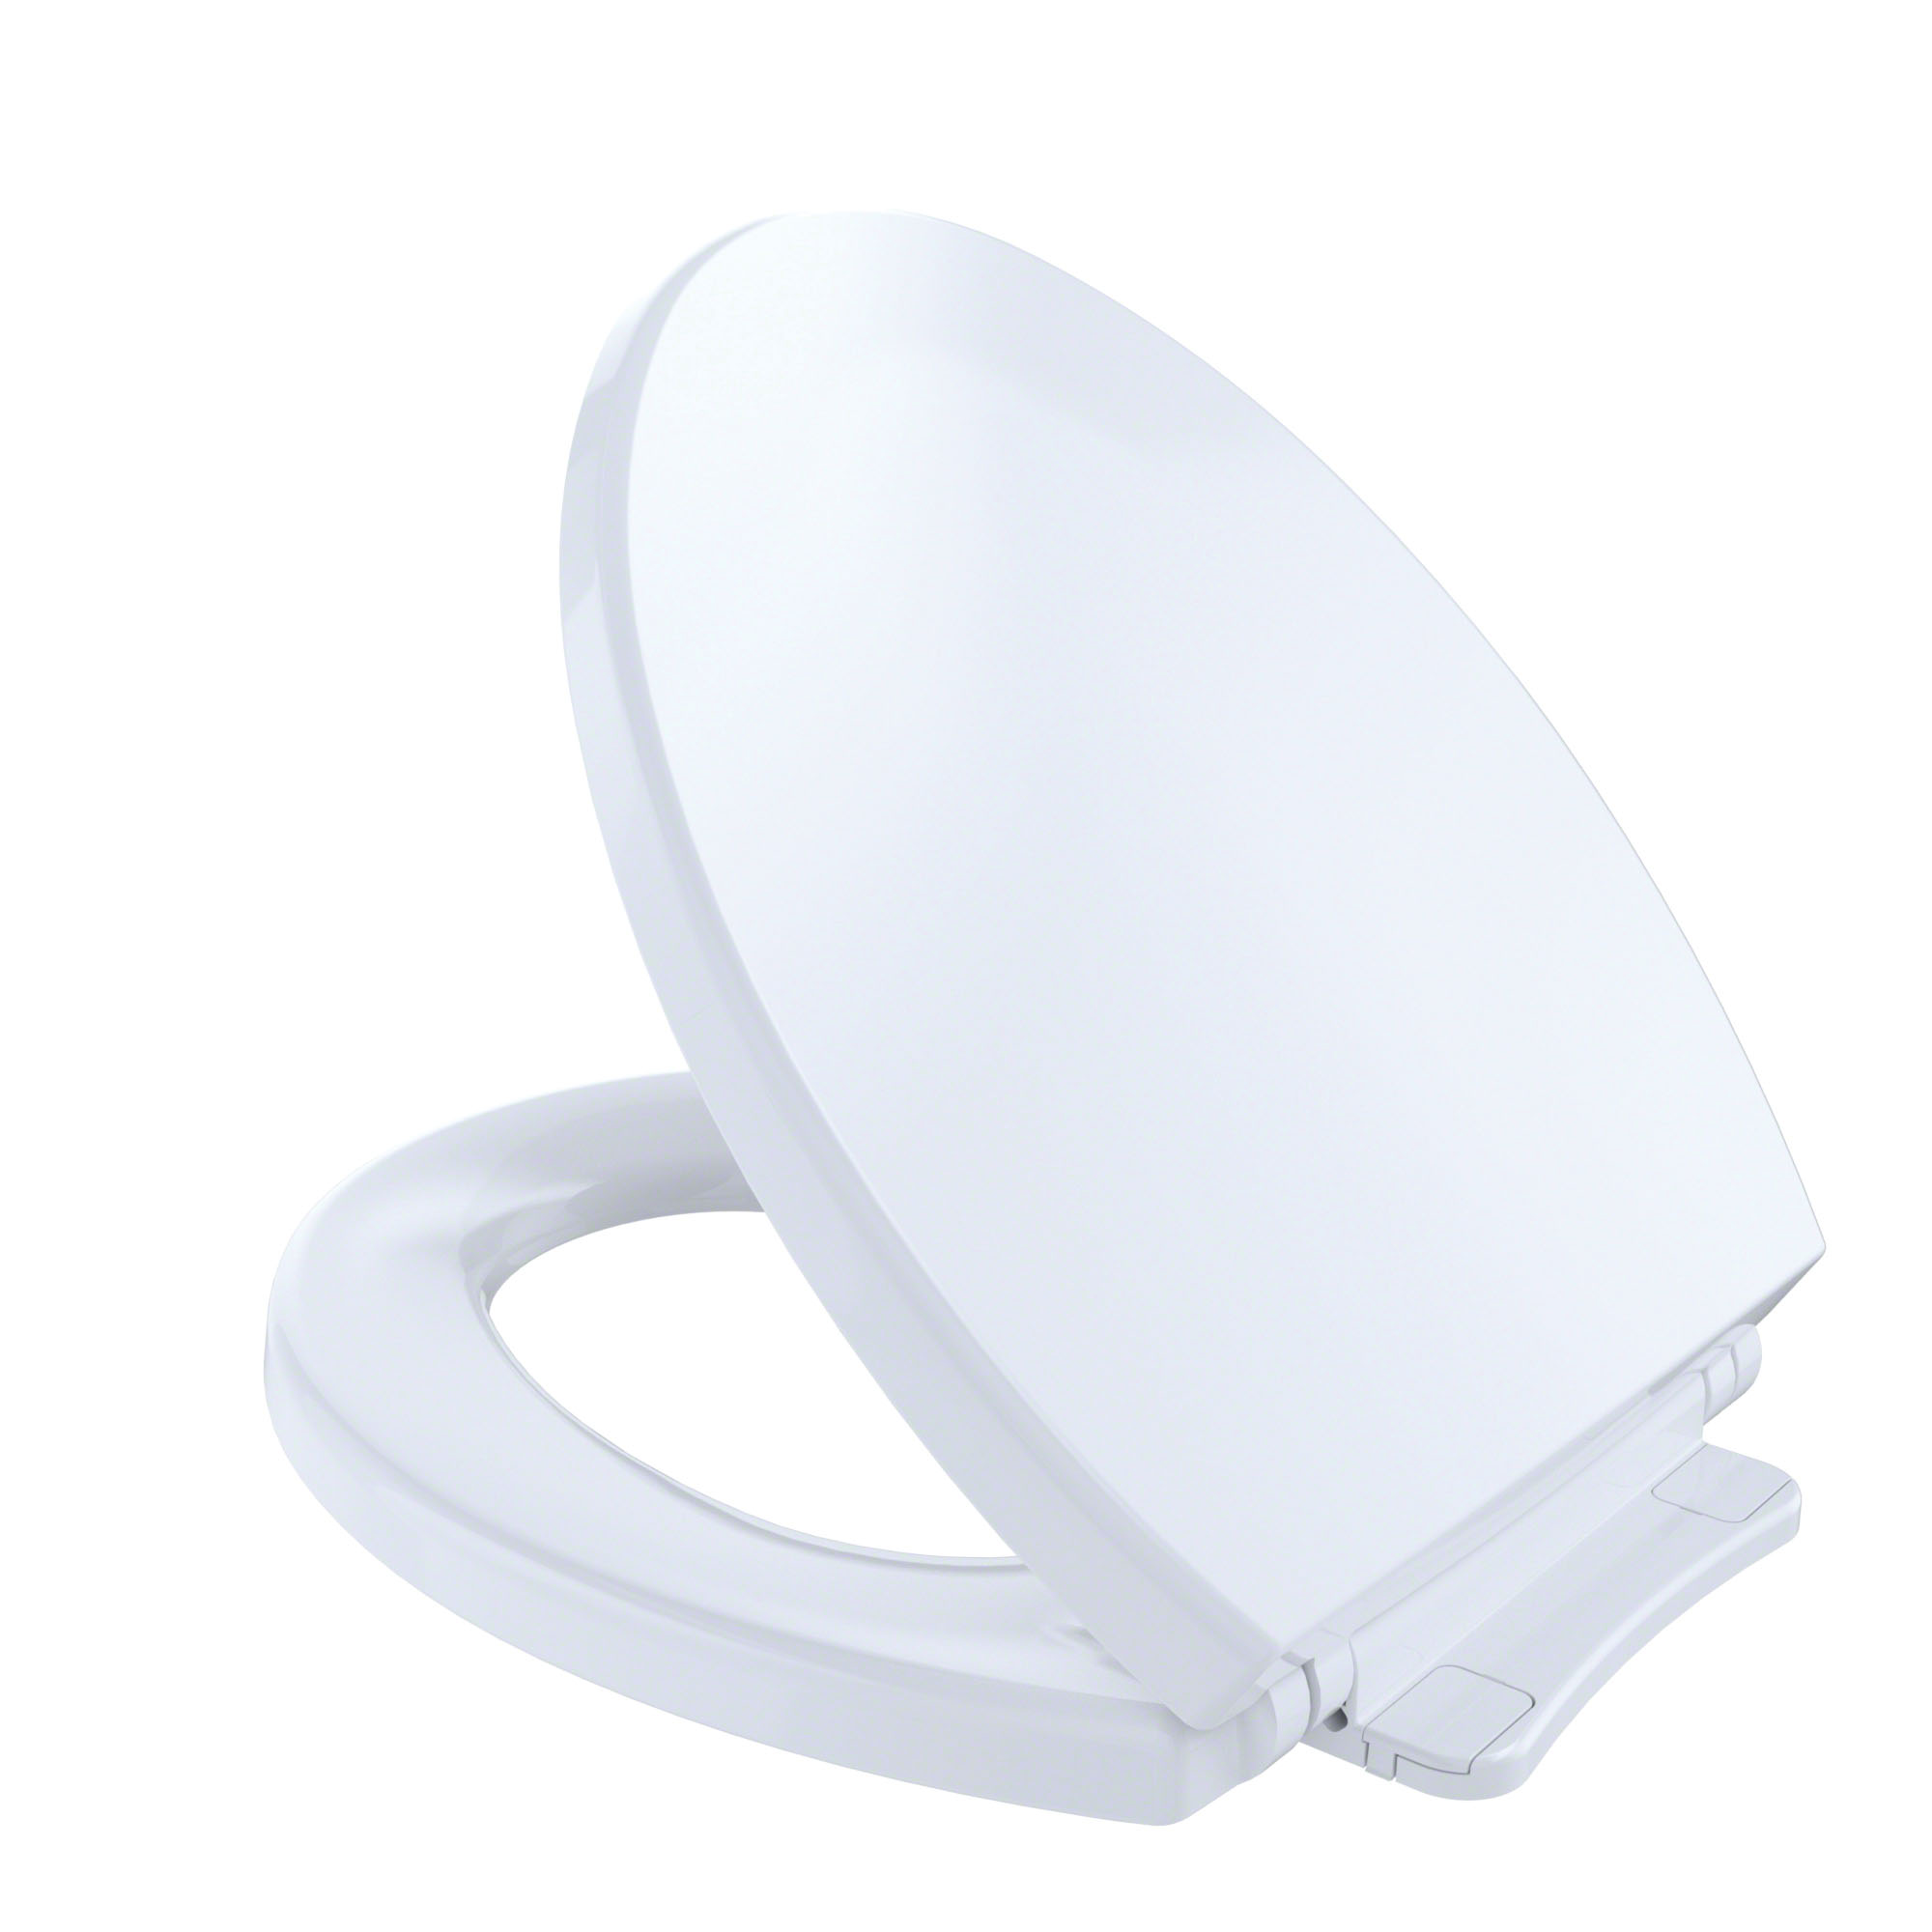 Toto® SoftClose® SS113#01 Toilet Seat With Cover, Round Bowl, Closed Front, Polypropylene, Cotton White, SoftClose® Hinge, Import